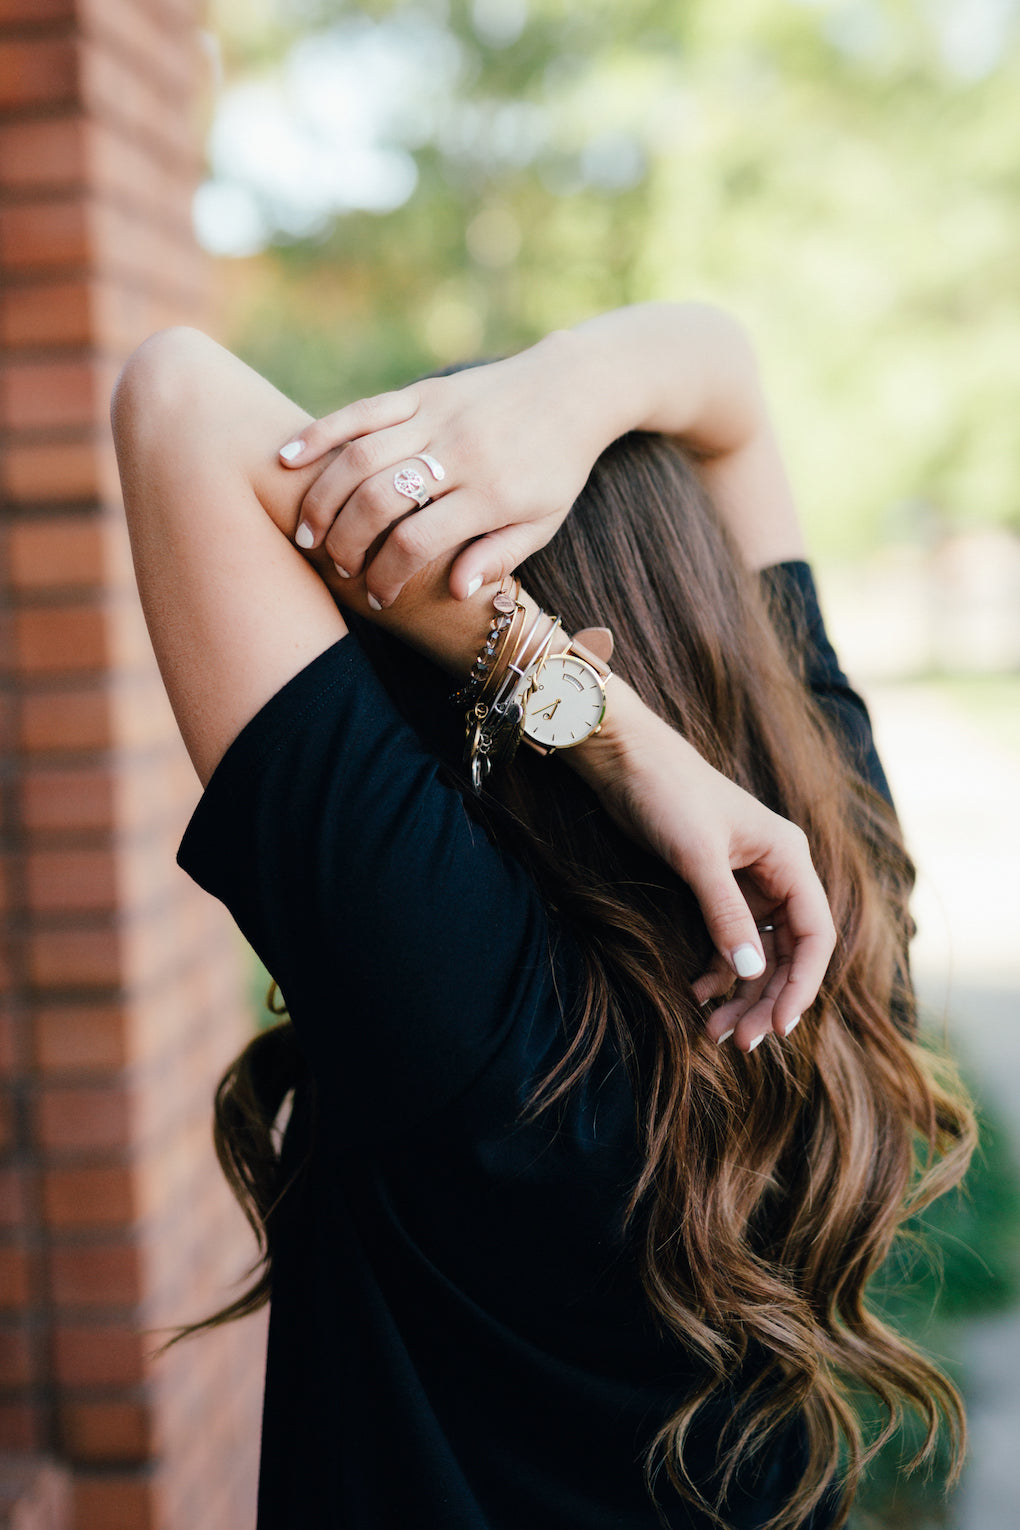 Woman with long brown hair and arms upstretched. She is wearing an Arvo Awristacrat gold watches for women with white dial, gold case, and nude or tan leather band